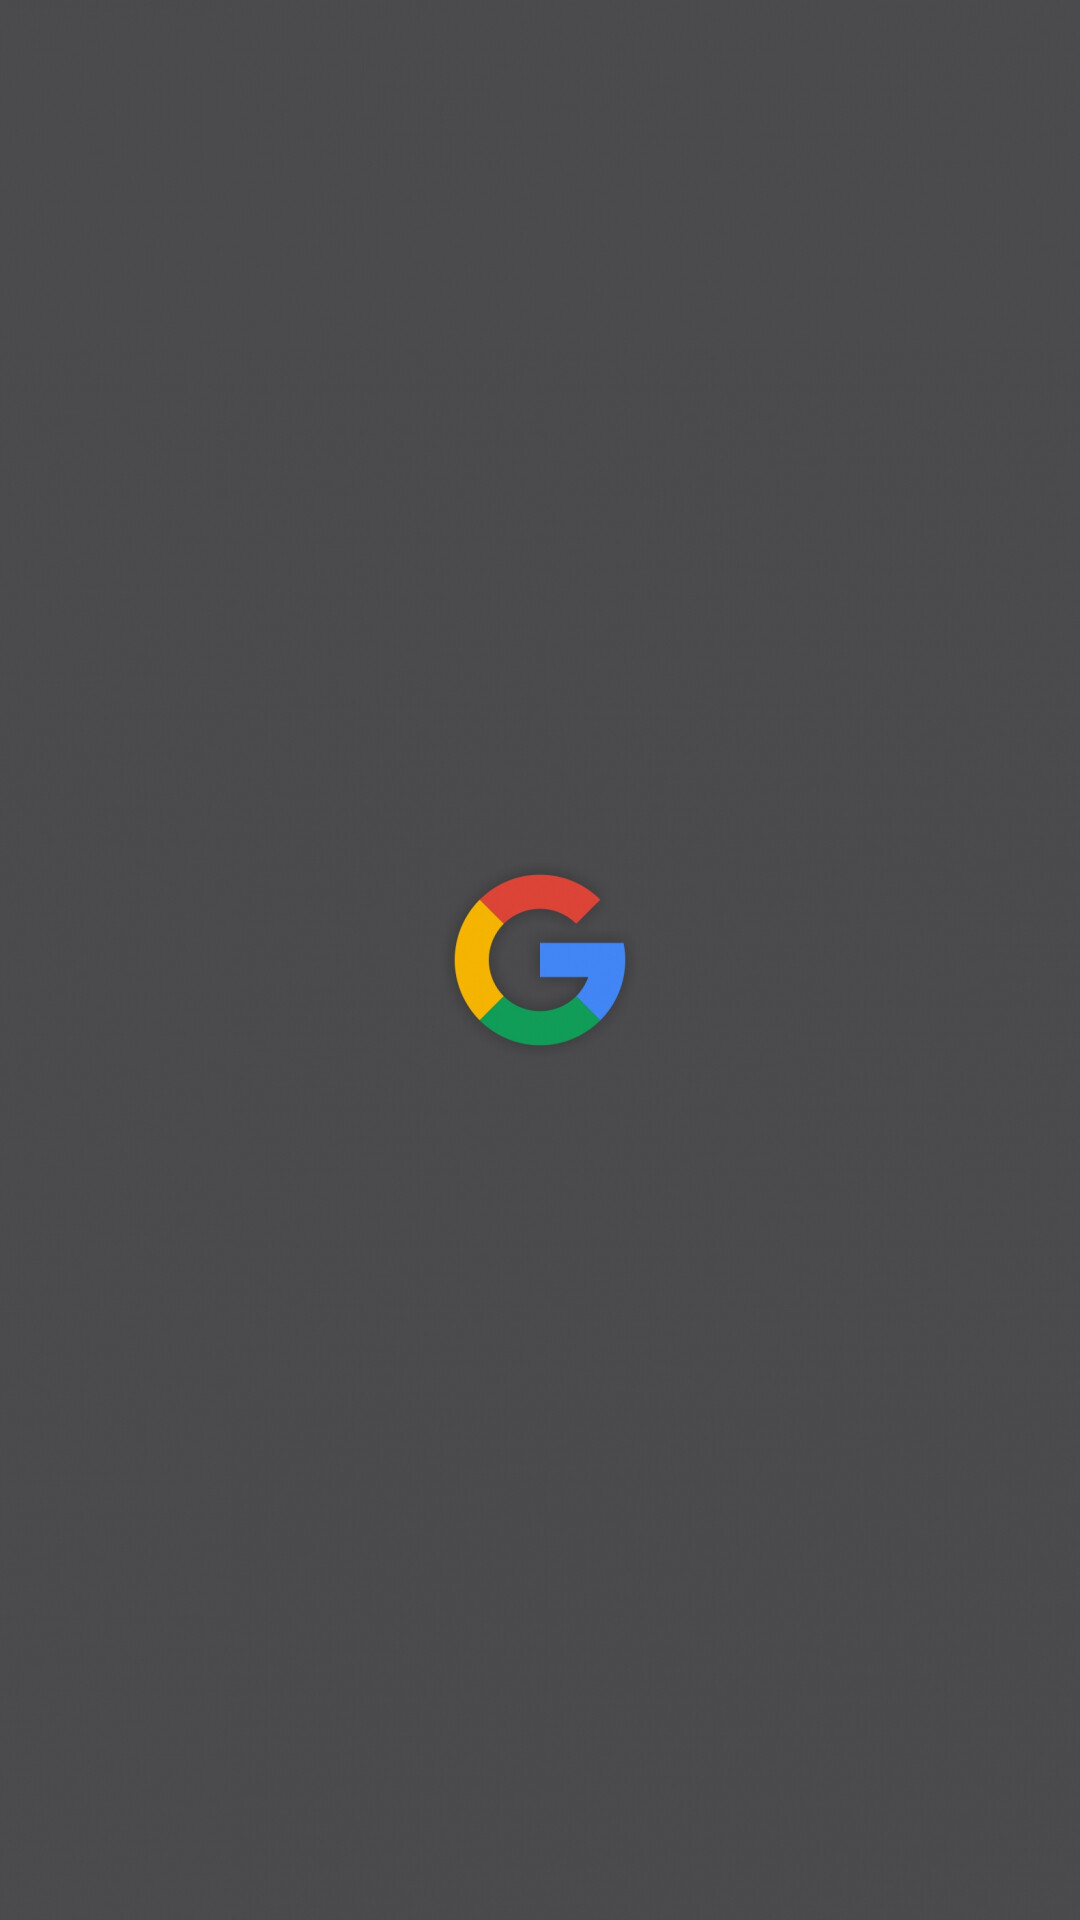 Google: Acquired DoubleClick for $3.1 billion on March 11, 2008. 1080x1920 Full HD Background.